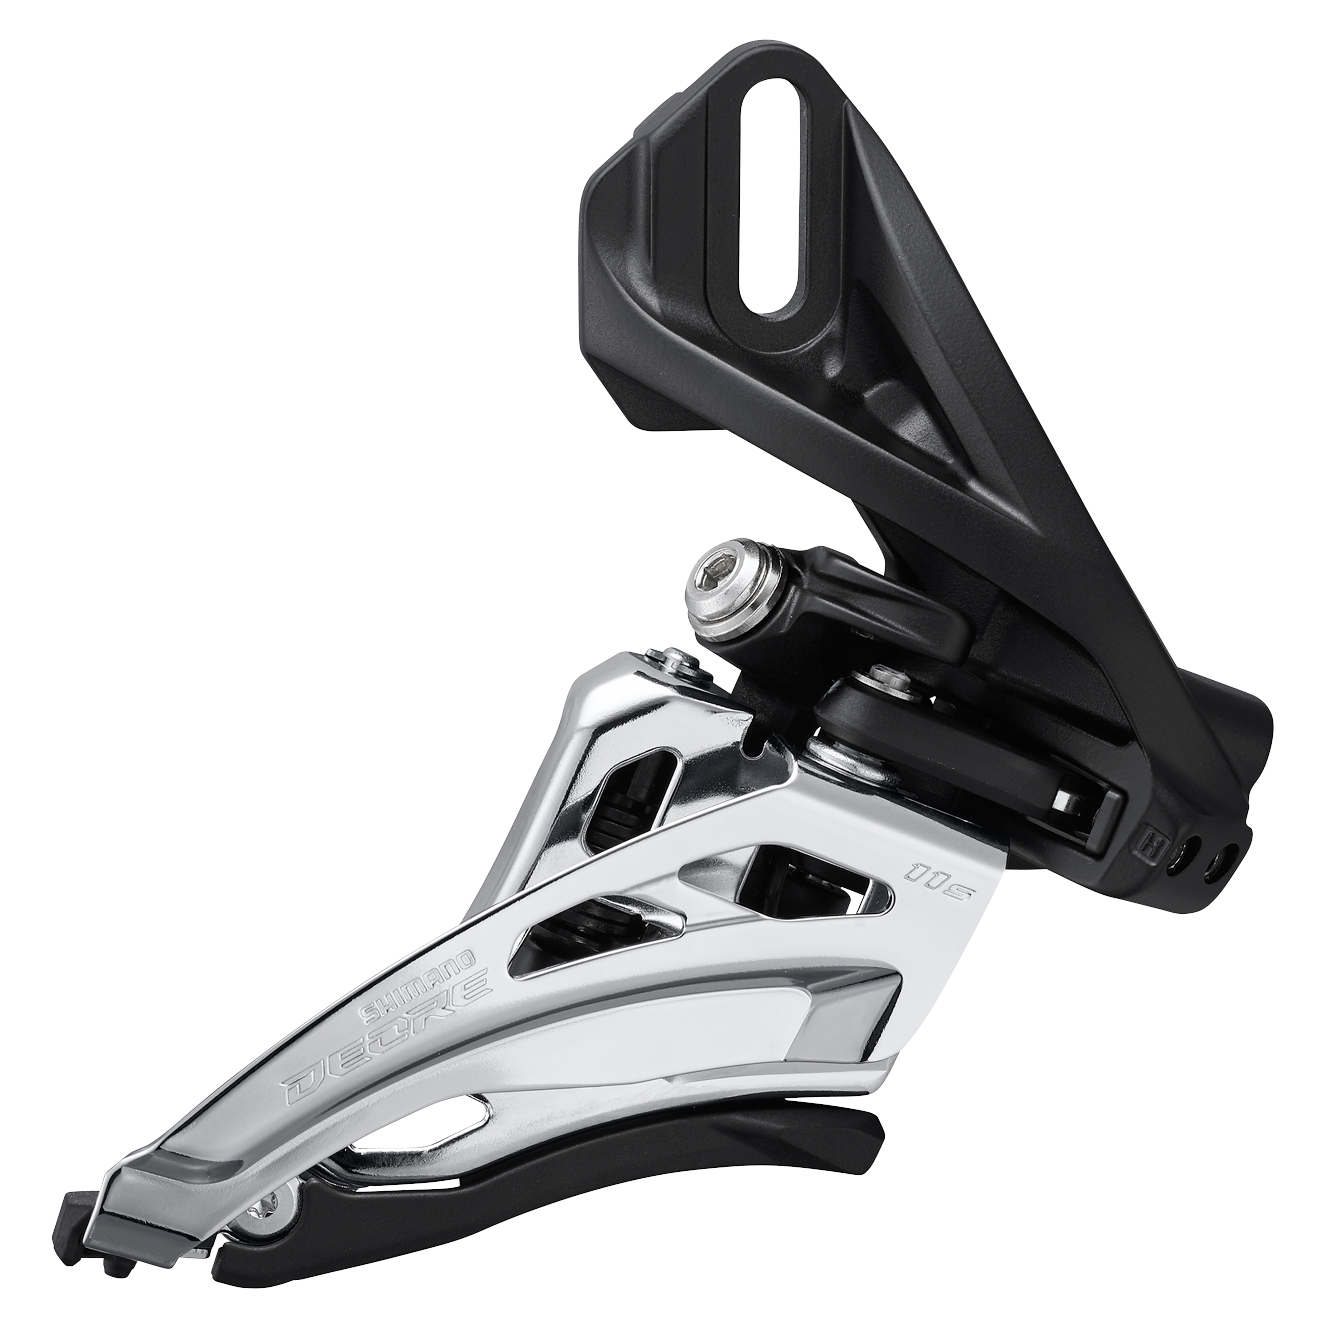 Productfoto van Shimano Deore FD-M5100 Side Swing Front Derailleur - 2x11-speed - Front Pull